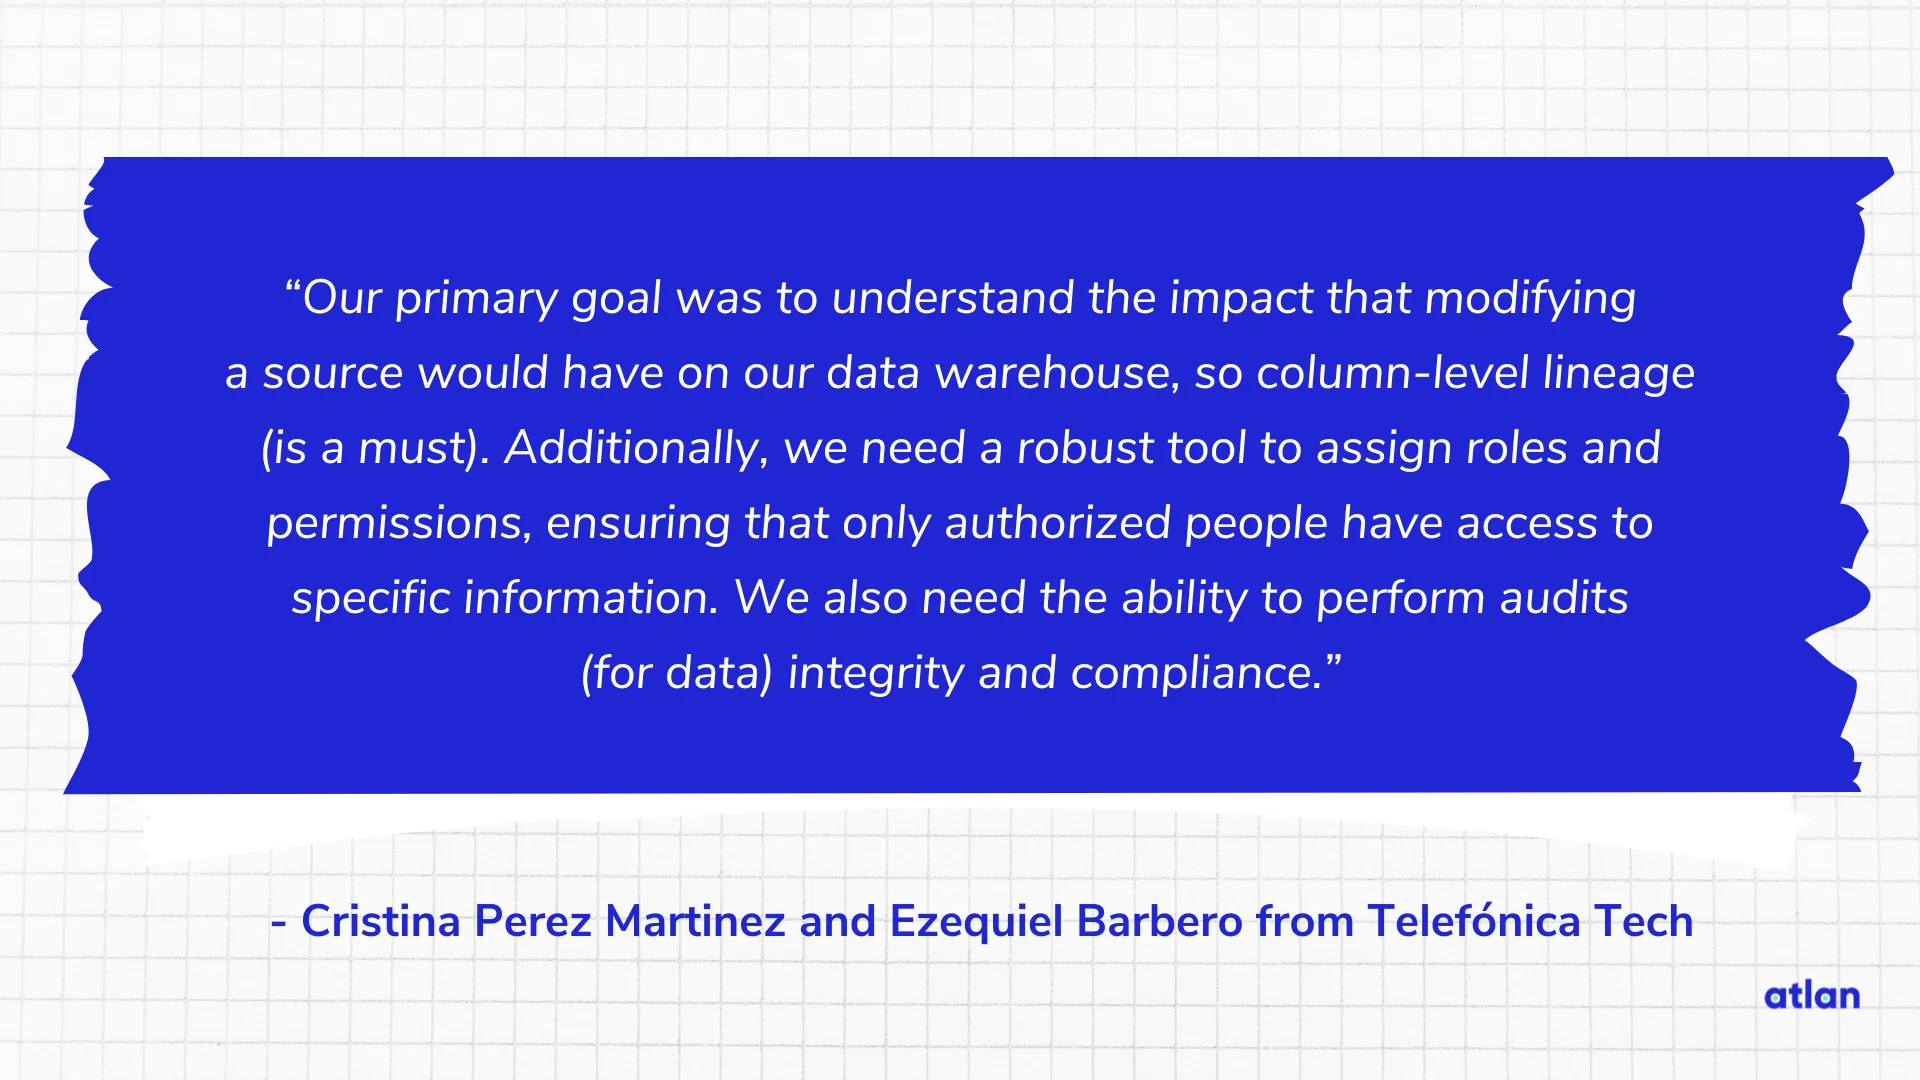 Telefónica Tech adopted Atlan to facilitate end-to-end visibility and traceabilit